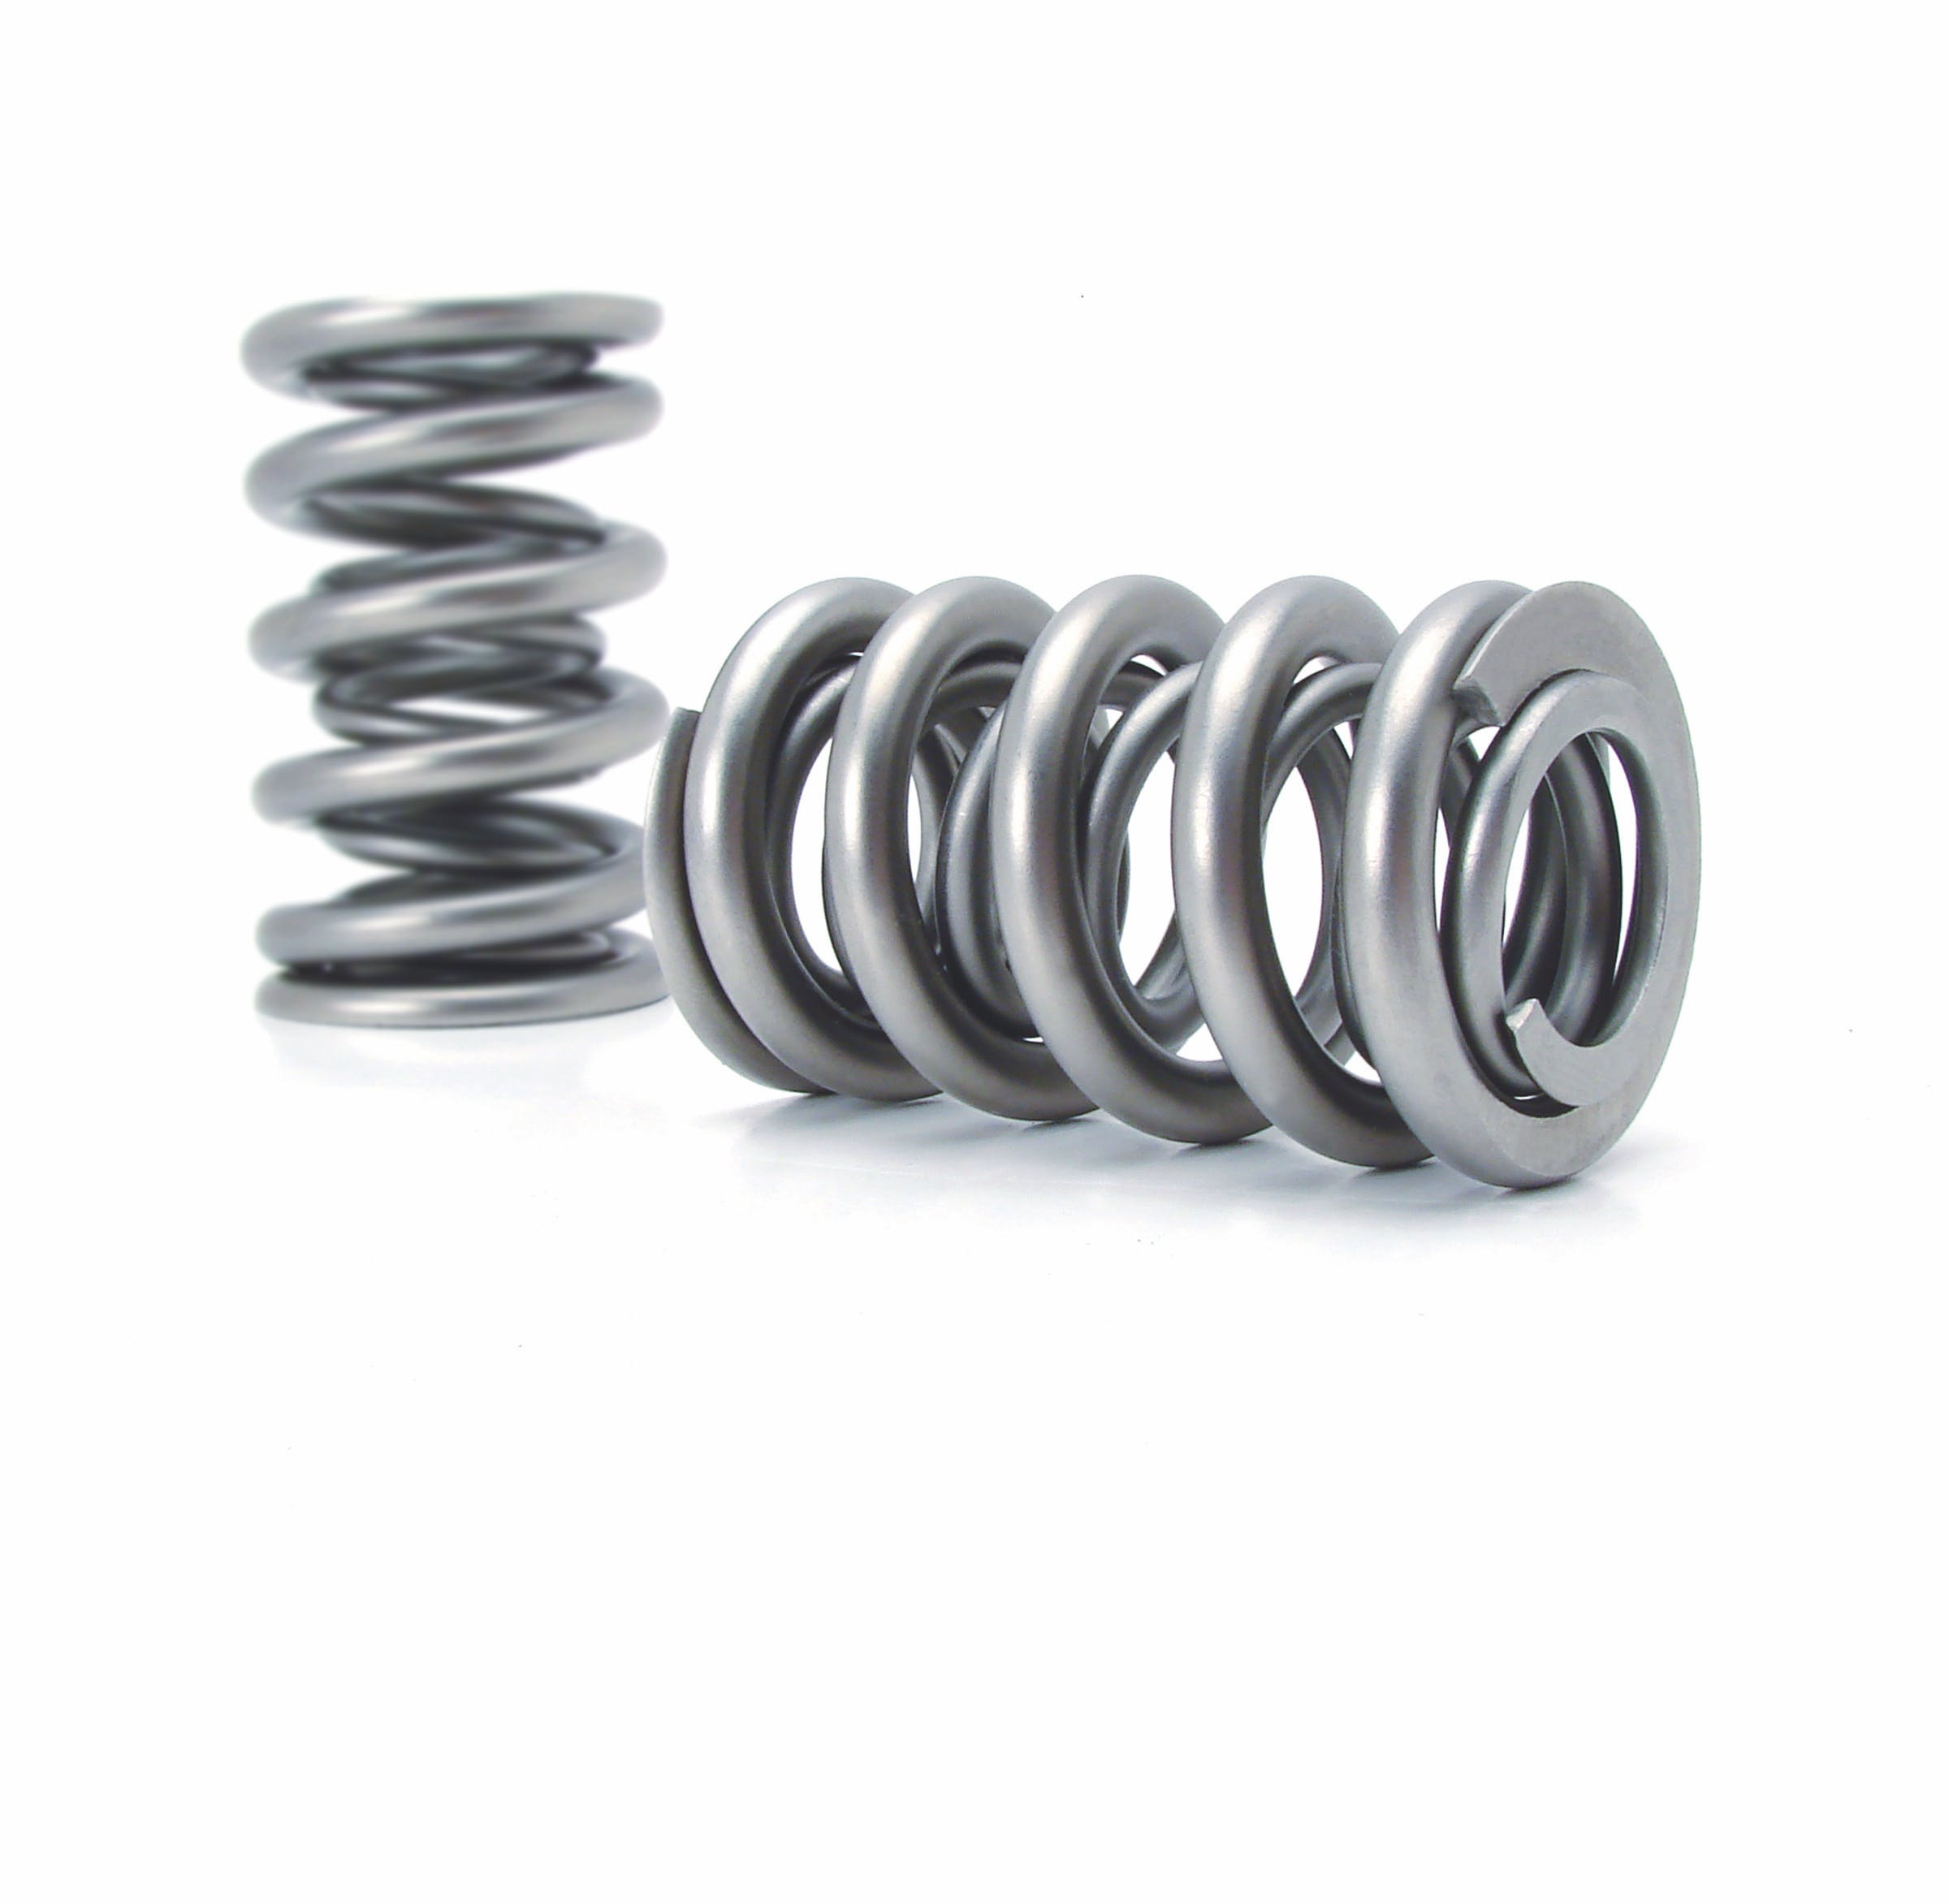 Competition Cams 26527-16 .700 inch Max Lift Dual Valve Springs for GM LS7, LT1 and LT4 Engines